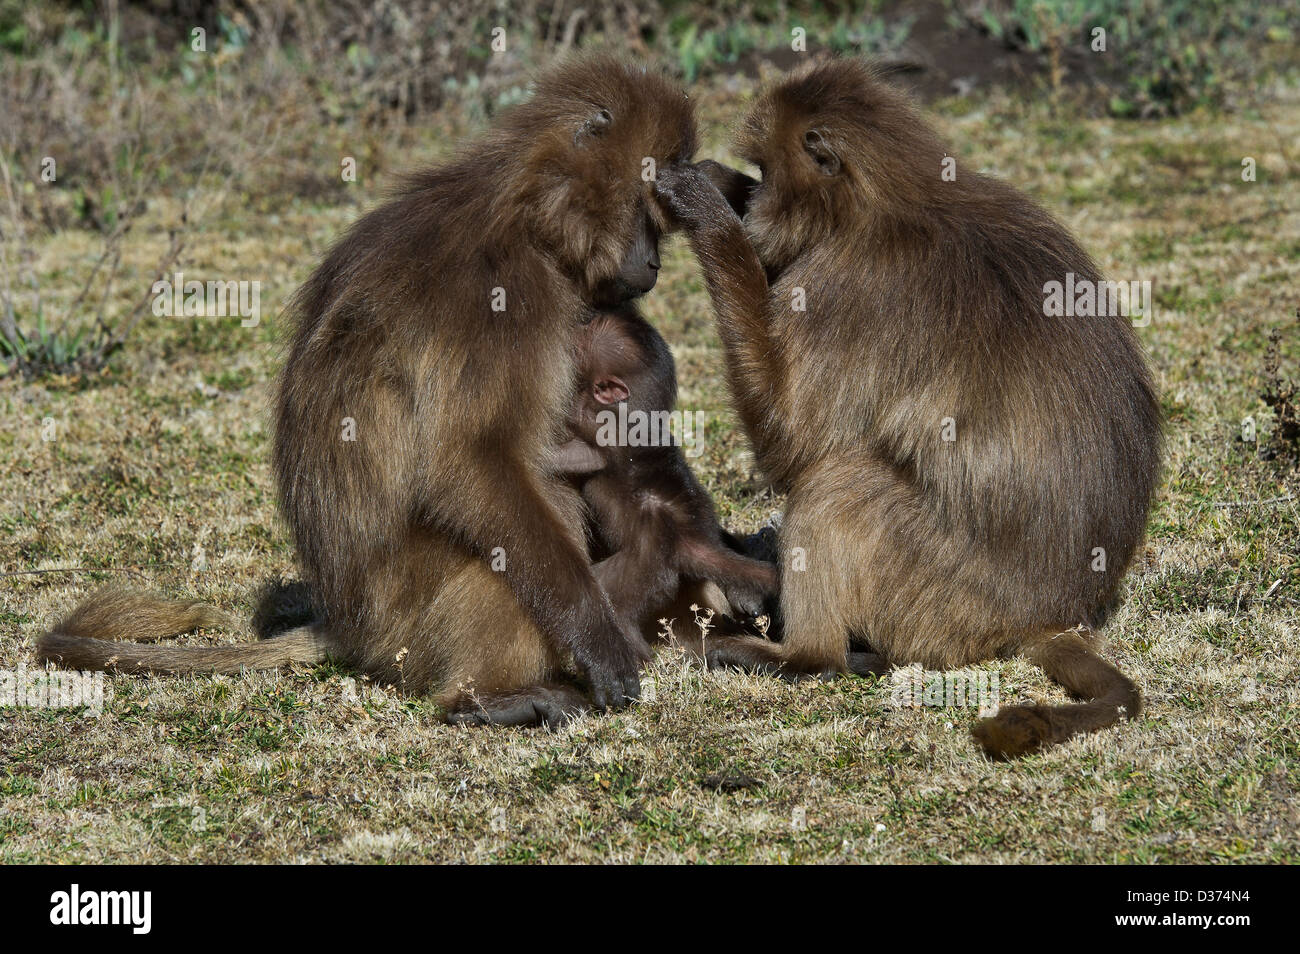 grooming between two female Gelada baboons, while one of them suckles its young, Ethiopia Stock Photo